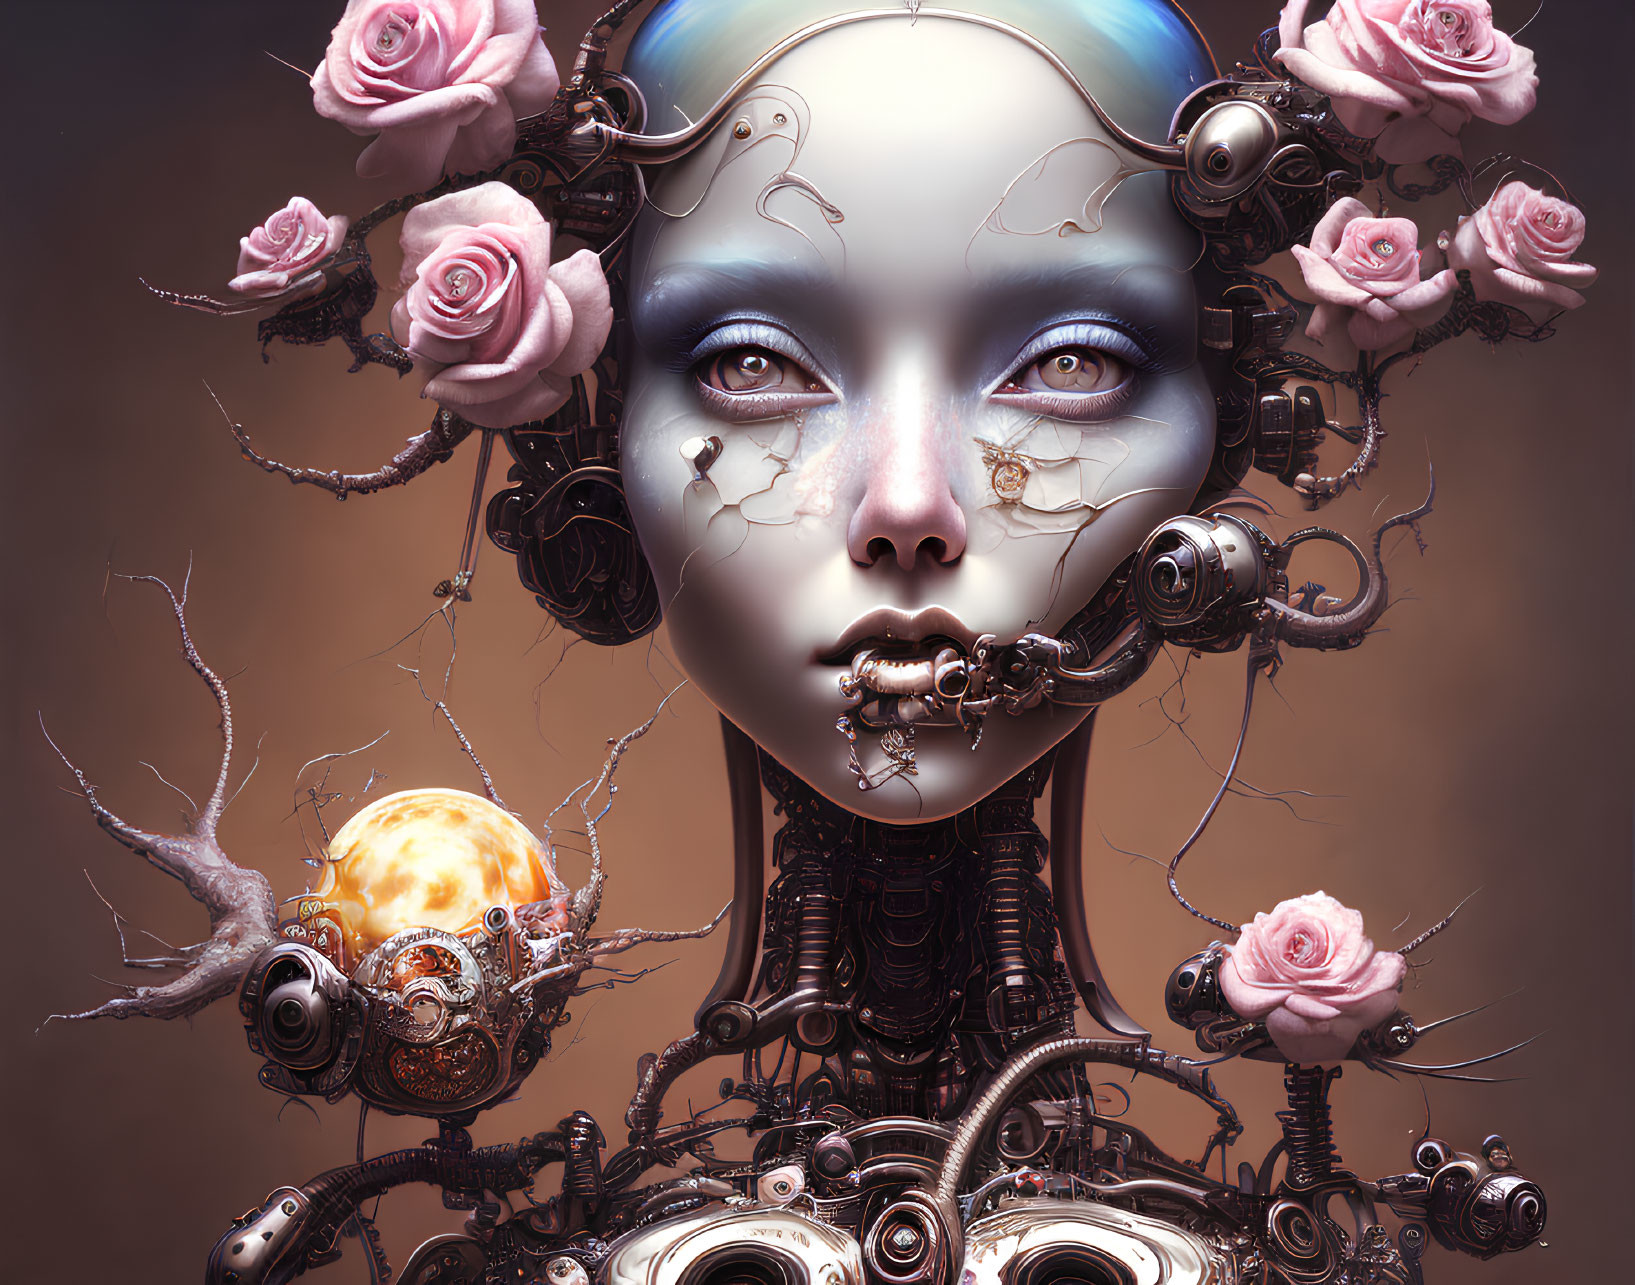 Robotic female figure with pink roses, mechanical parts, and glowing orb